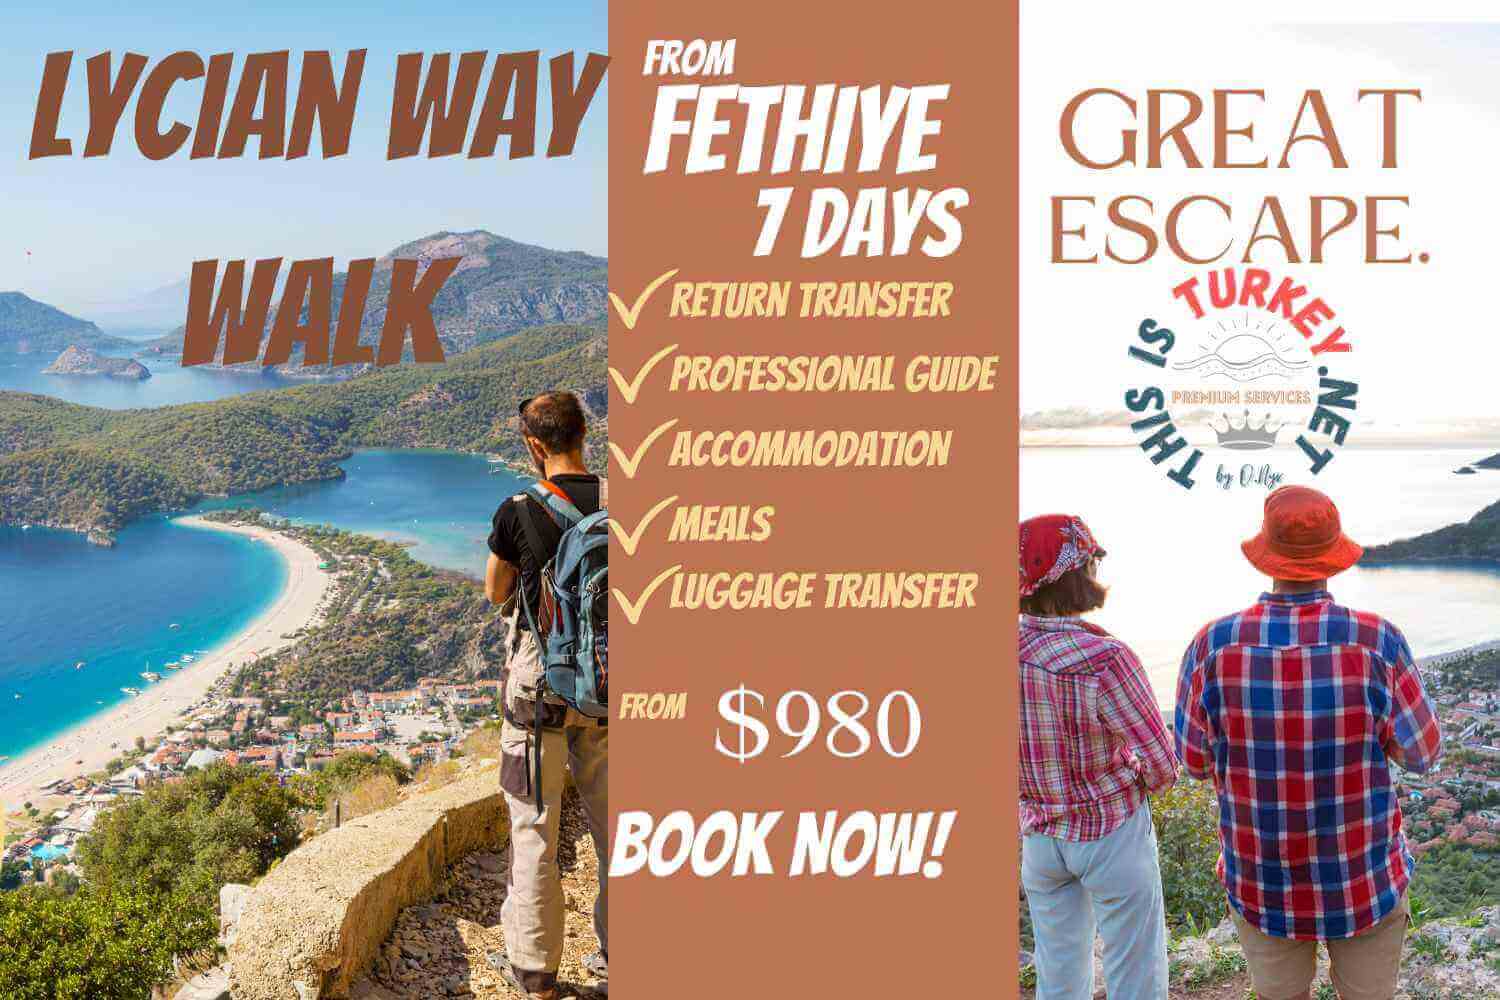 Apowerful journey to one of the world’s magnificent trails in Turkey. from 900 US Dollars Per Person Highlights Lycian Way Walking Fethiye and Oludeniz Relaxed and Chilled Regardless of the level, you are on, a casual walker or a professional one, this powerful journey will appeal to those looking for a healthier way to acknowledge grand scenery. You will walk through across flower-filled fields, pine forests and olive groves, wave to shepherds, then relax in simple, picturesque accommodation along the coast. This is an experience at its simplest and most pure. Our Lycian Trekking Excursion consists of two parts: You will witness the most beautiful archaeological sites and spectacular beauty of the landscape along the Lycian route